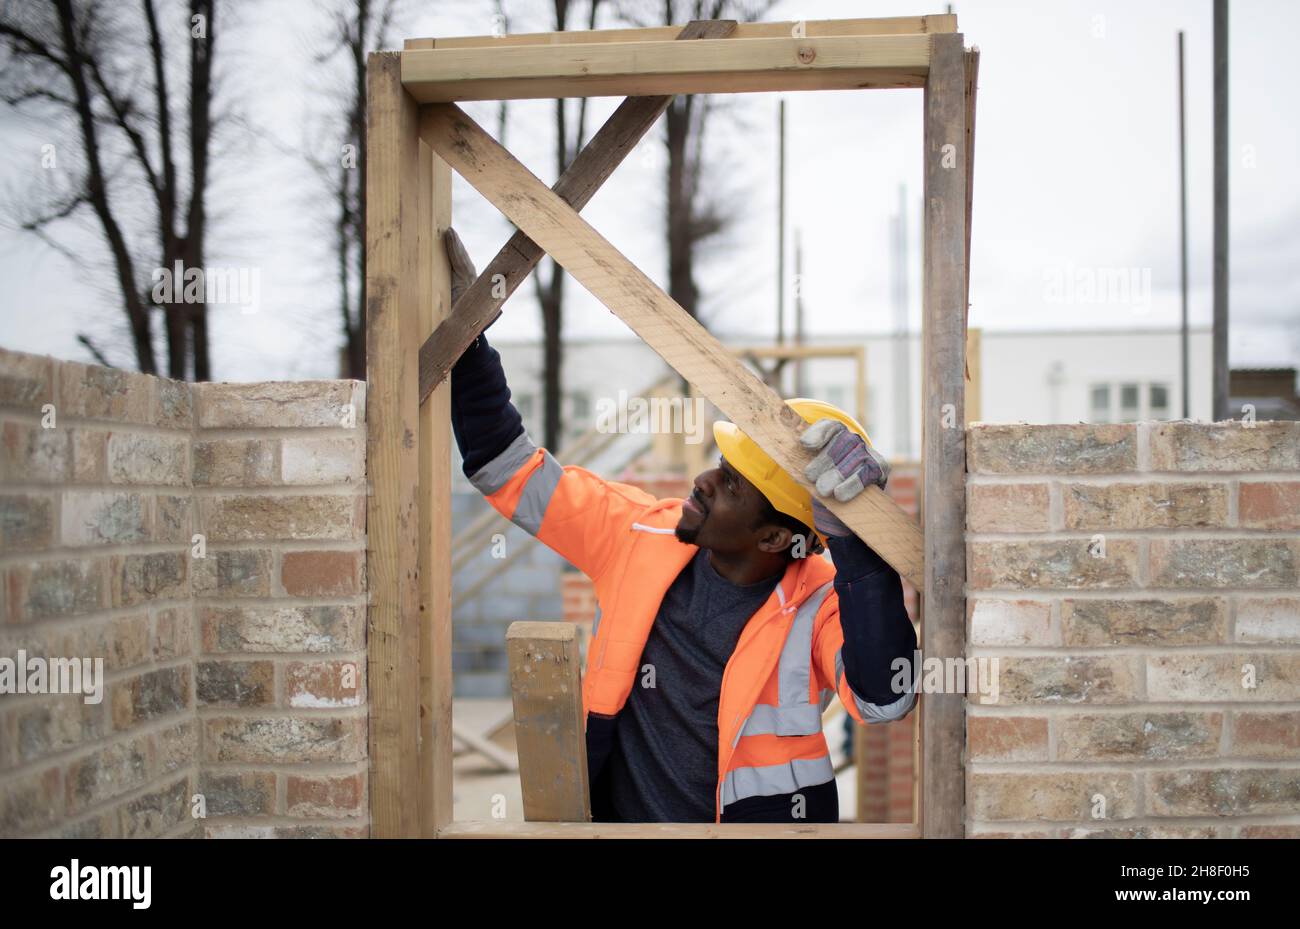 Male construction worker installing door frame at construction site Stock Photo